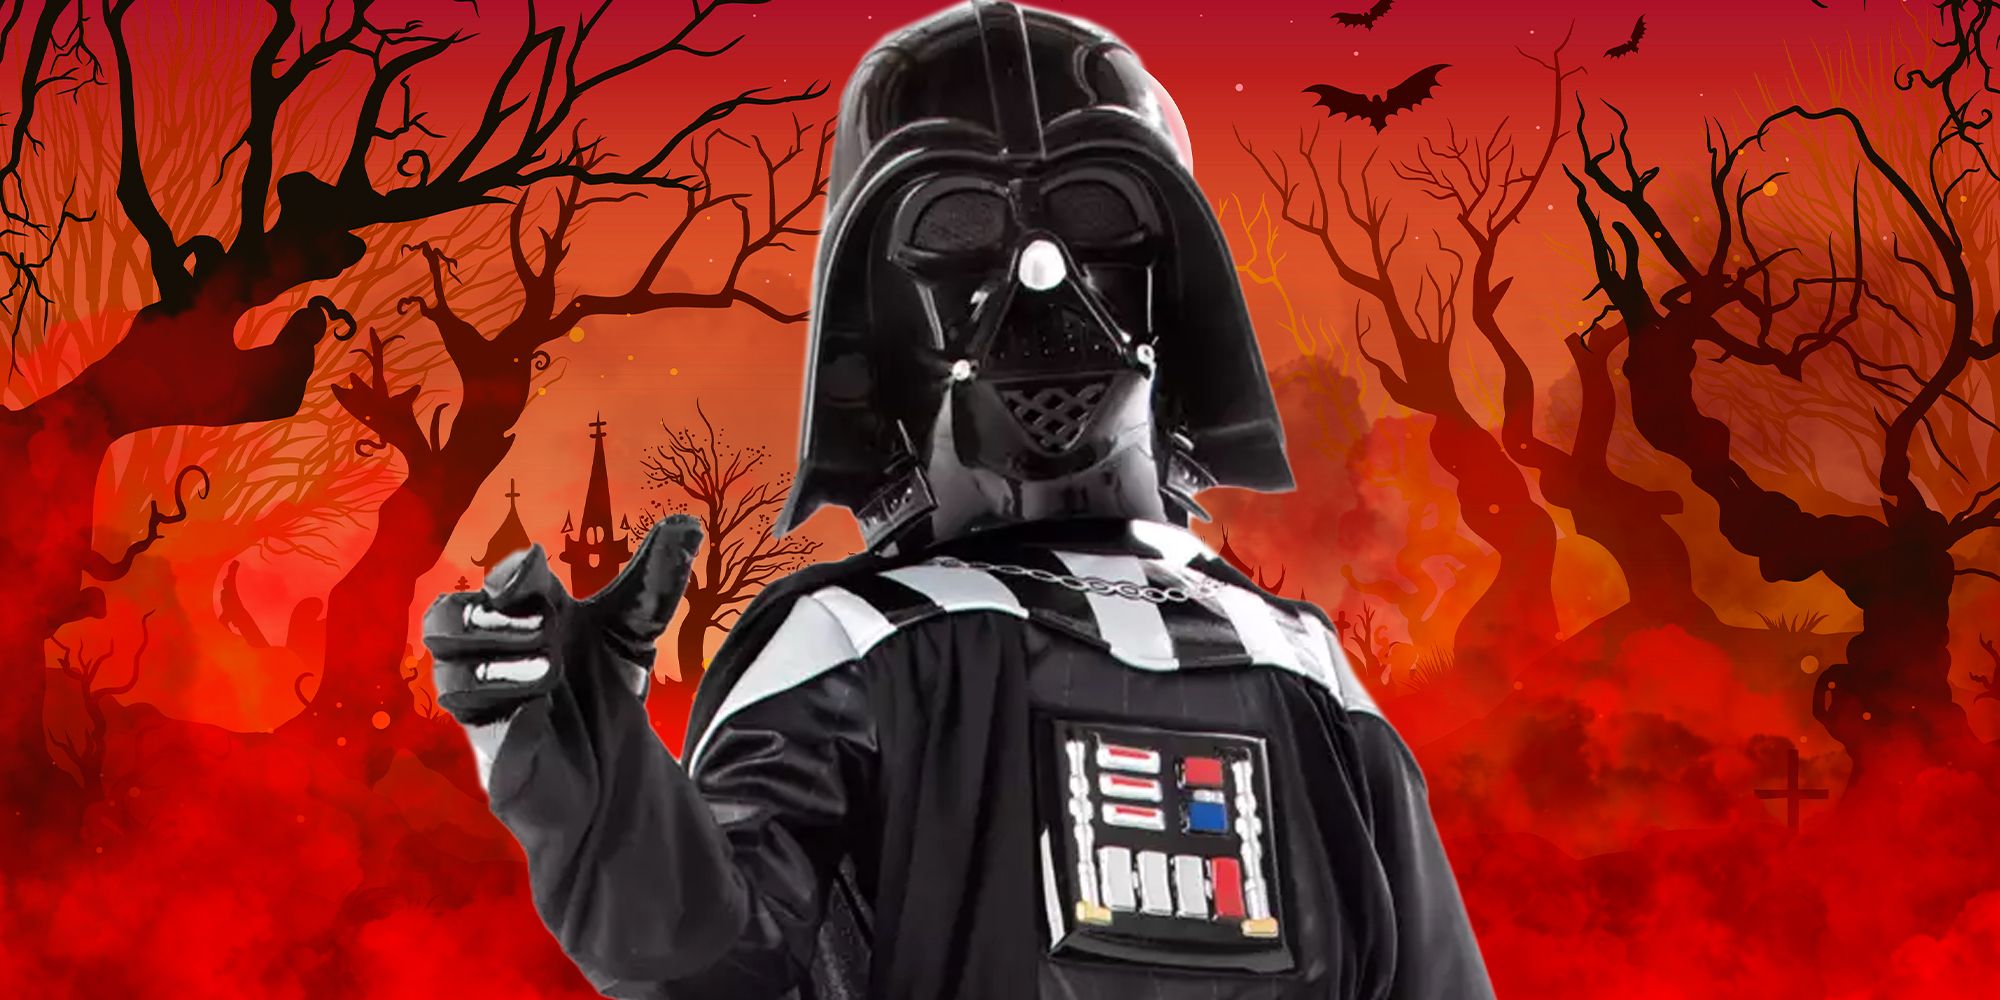 kid dresseed as darth vader doing a force choke for halloween